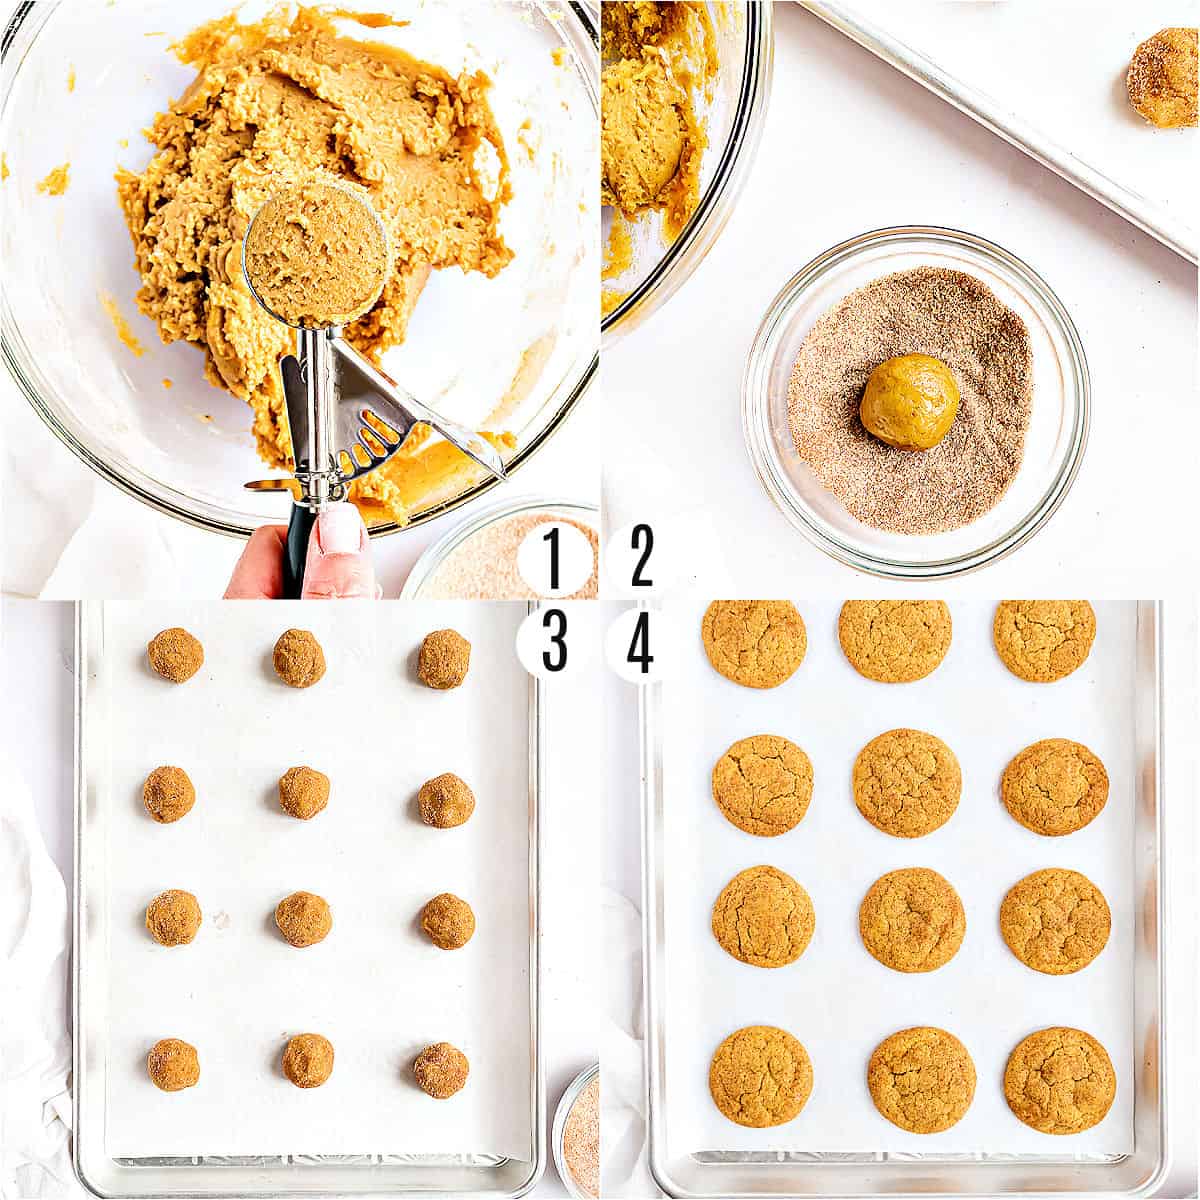 Step by step photos showing how to make pumpkin snickerdoodles.